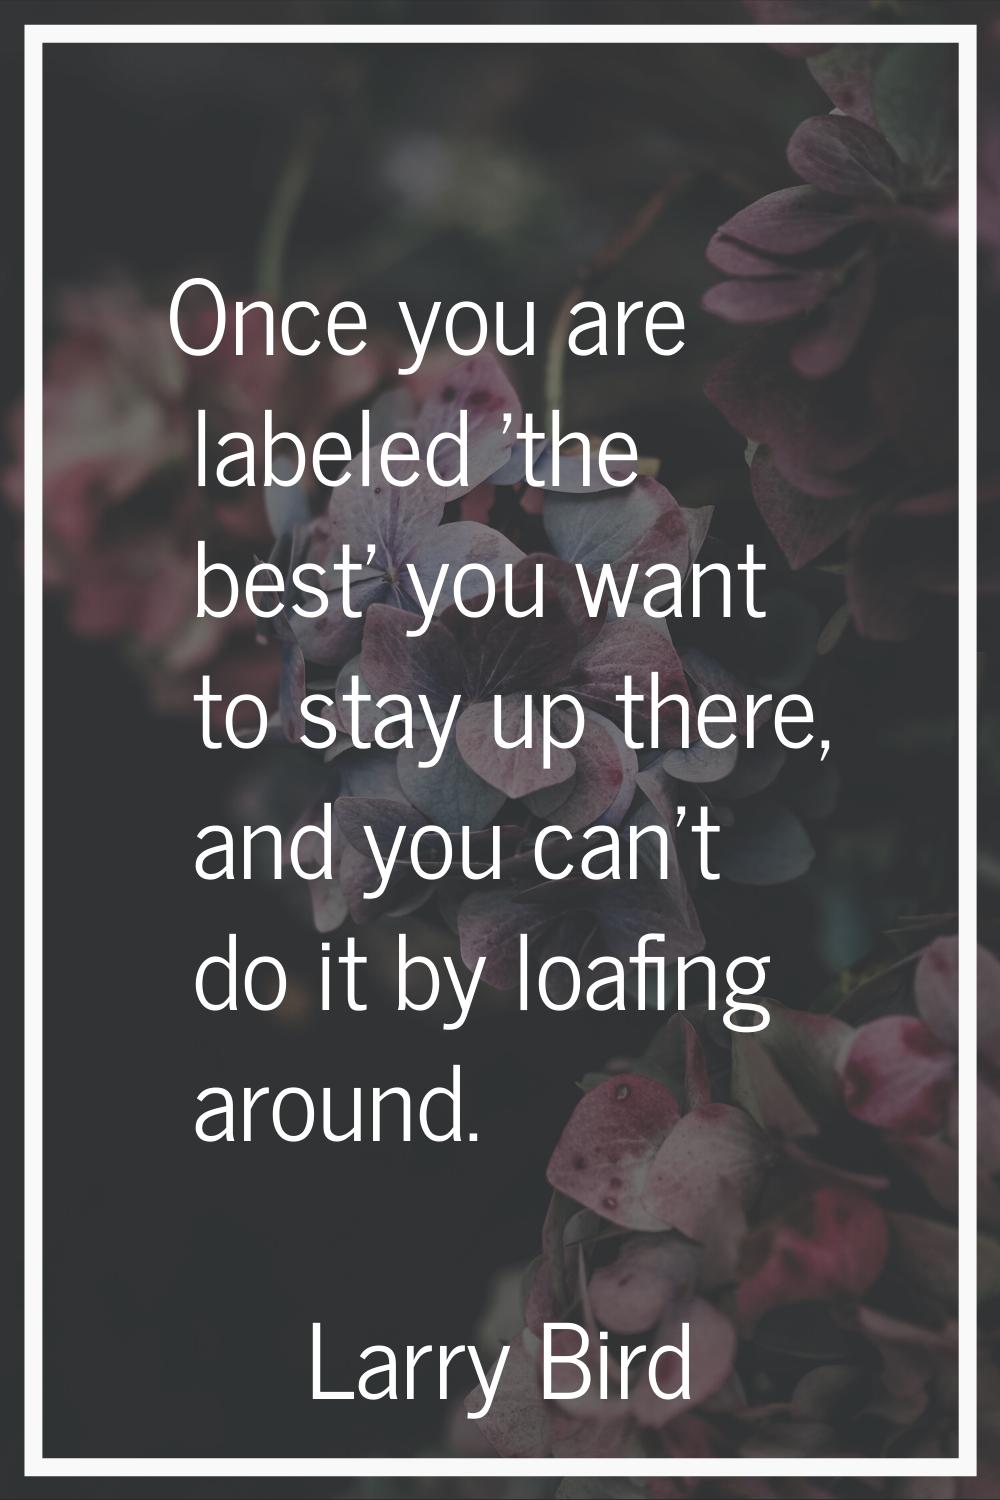 Once you are labeled 'the best' you want to stay up there, and you can't do it by loafing around.